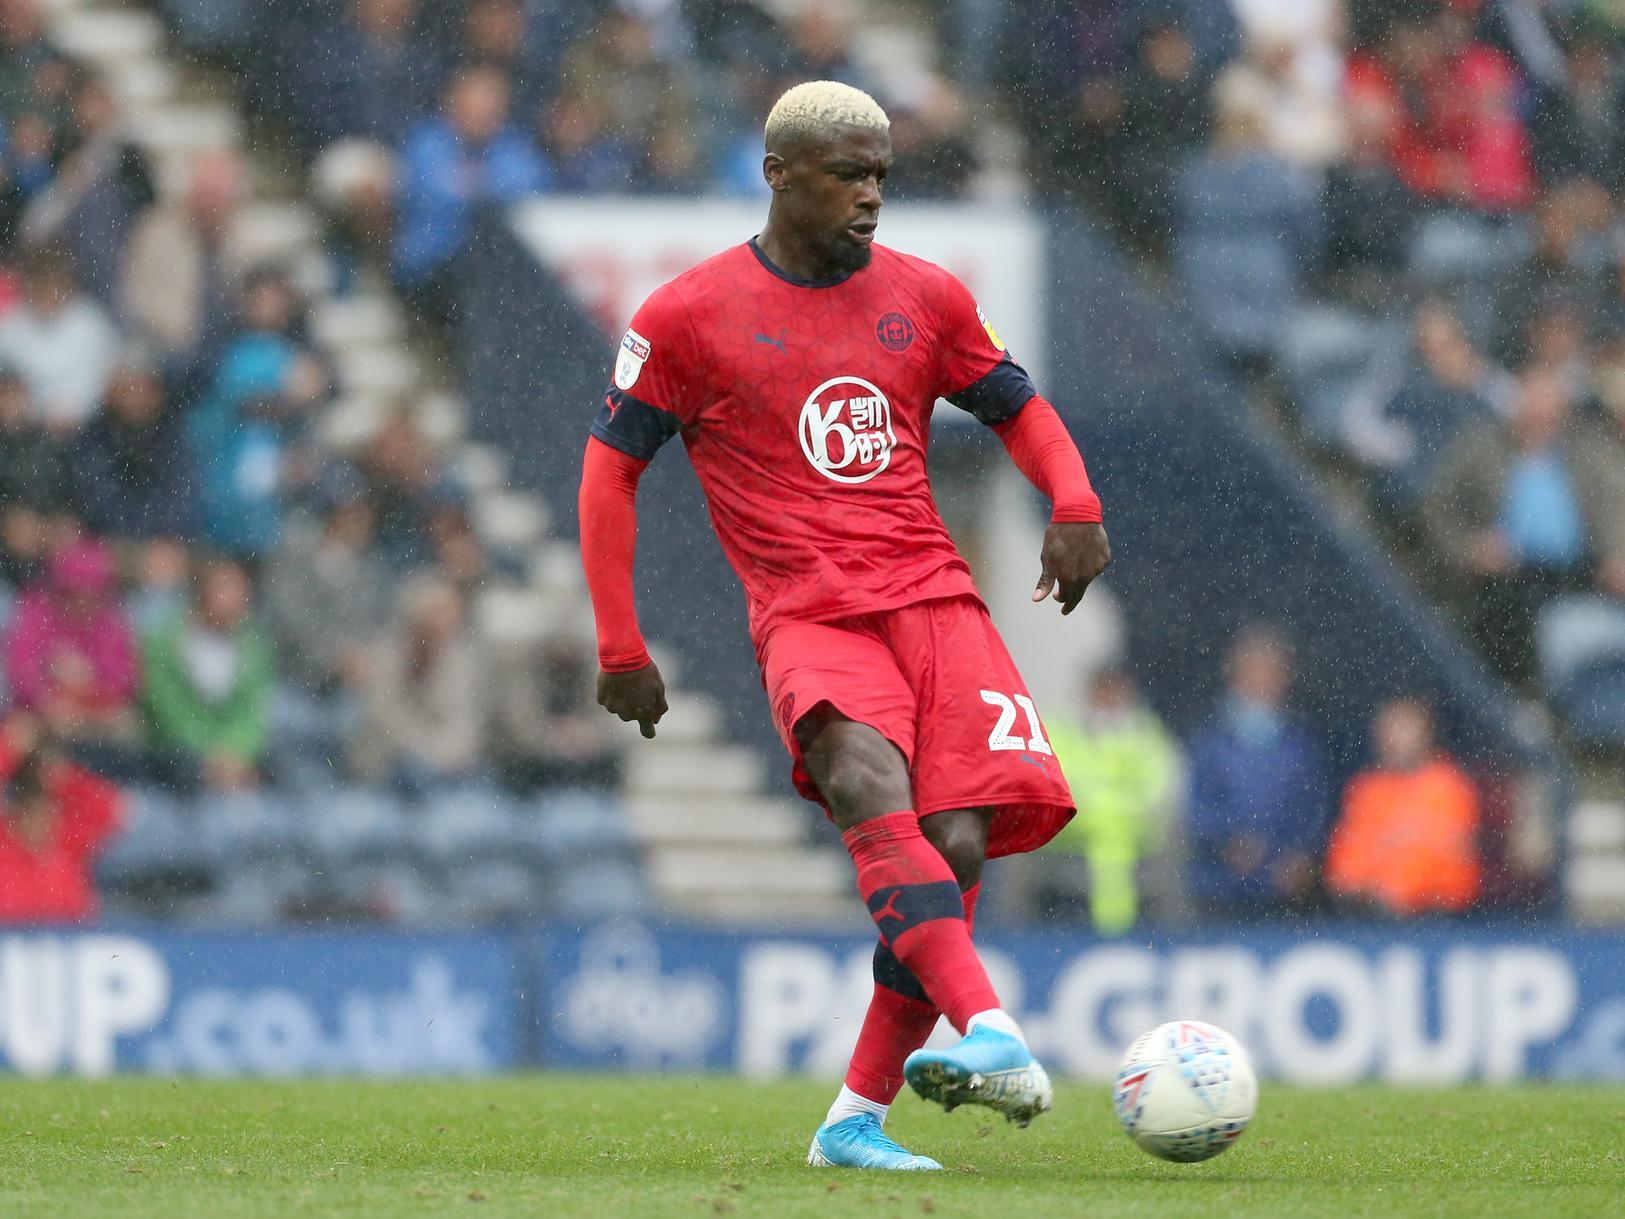 Cedric Kipre: 6 - Not quite the imperious figure of late but stood strong against a lively attack